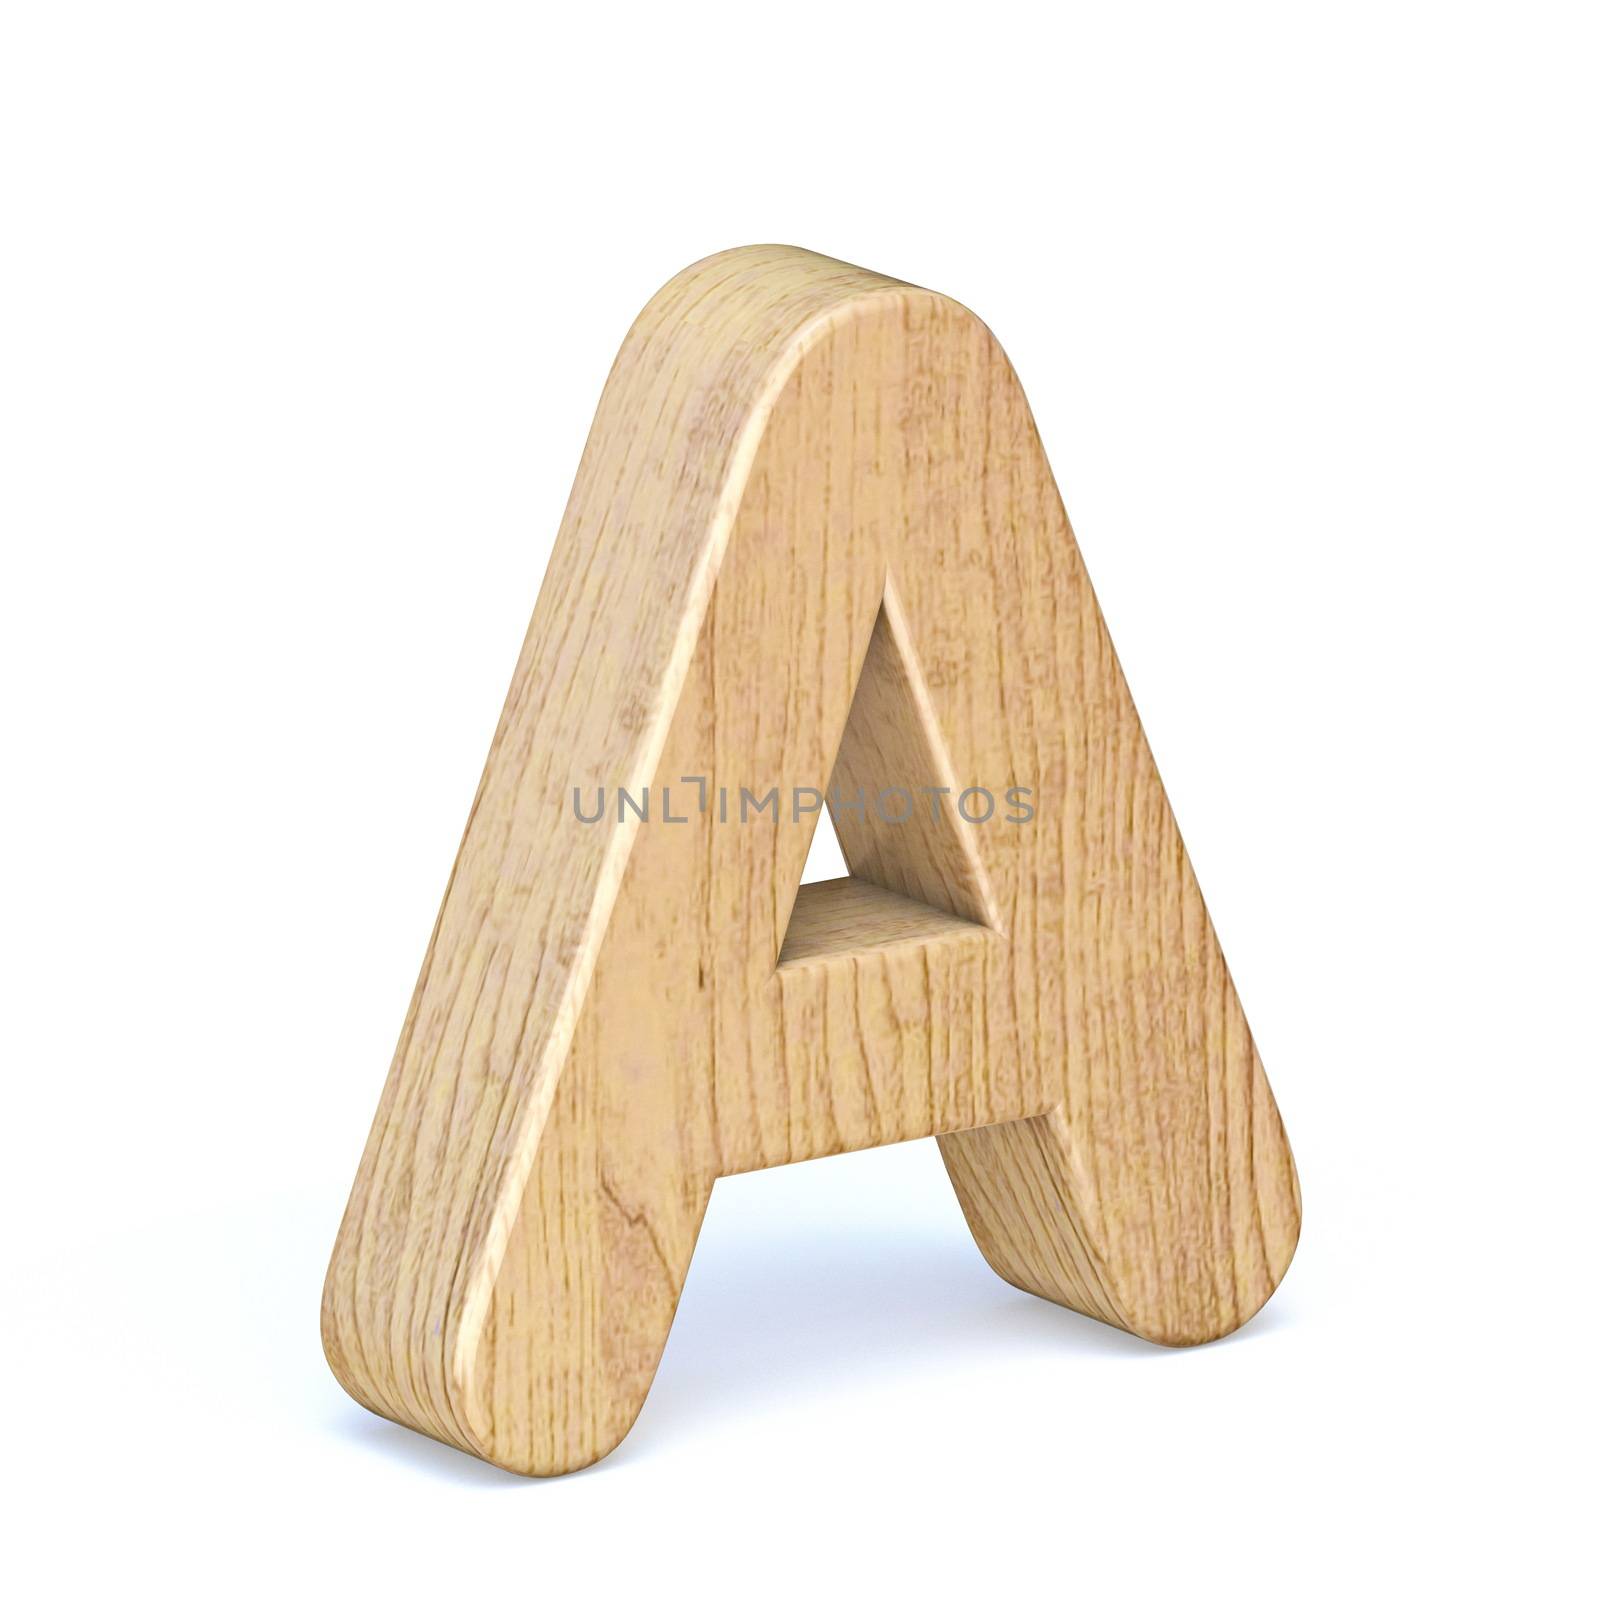 Rounded wooden font Letter A 3D render illustration isolated on white background